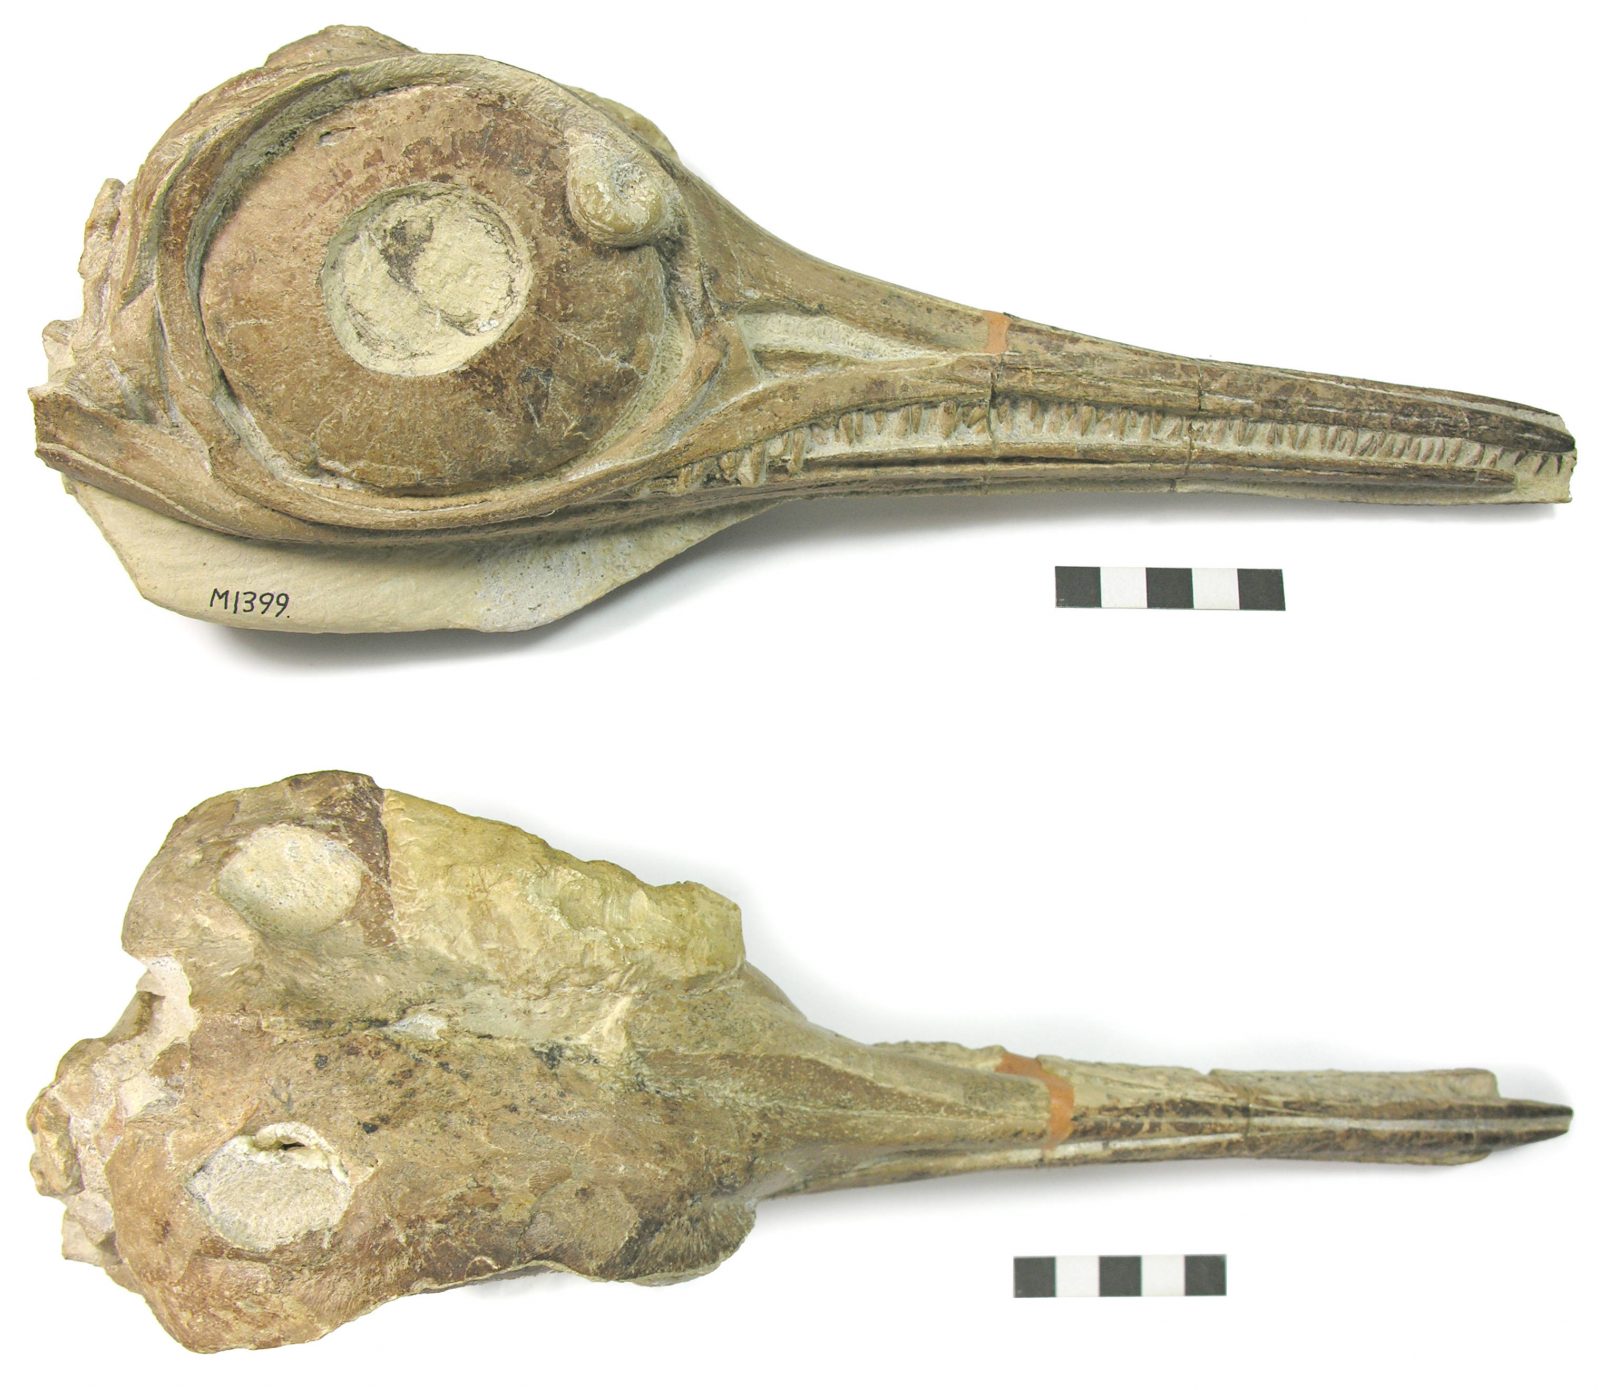 The right anterior and dorsal view of the skull of the specimen to the left